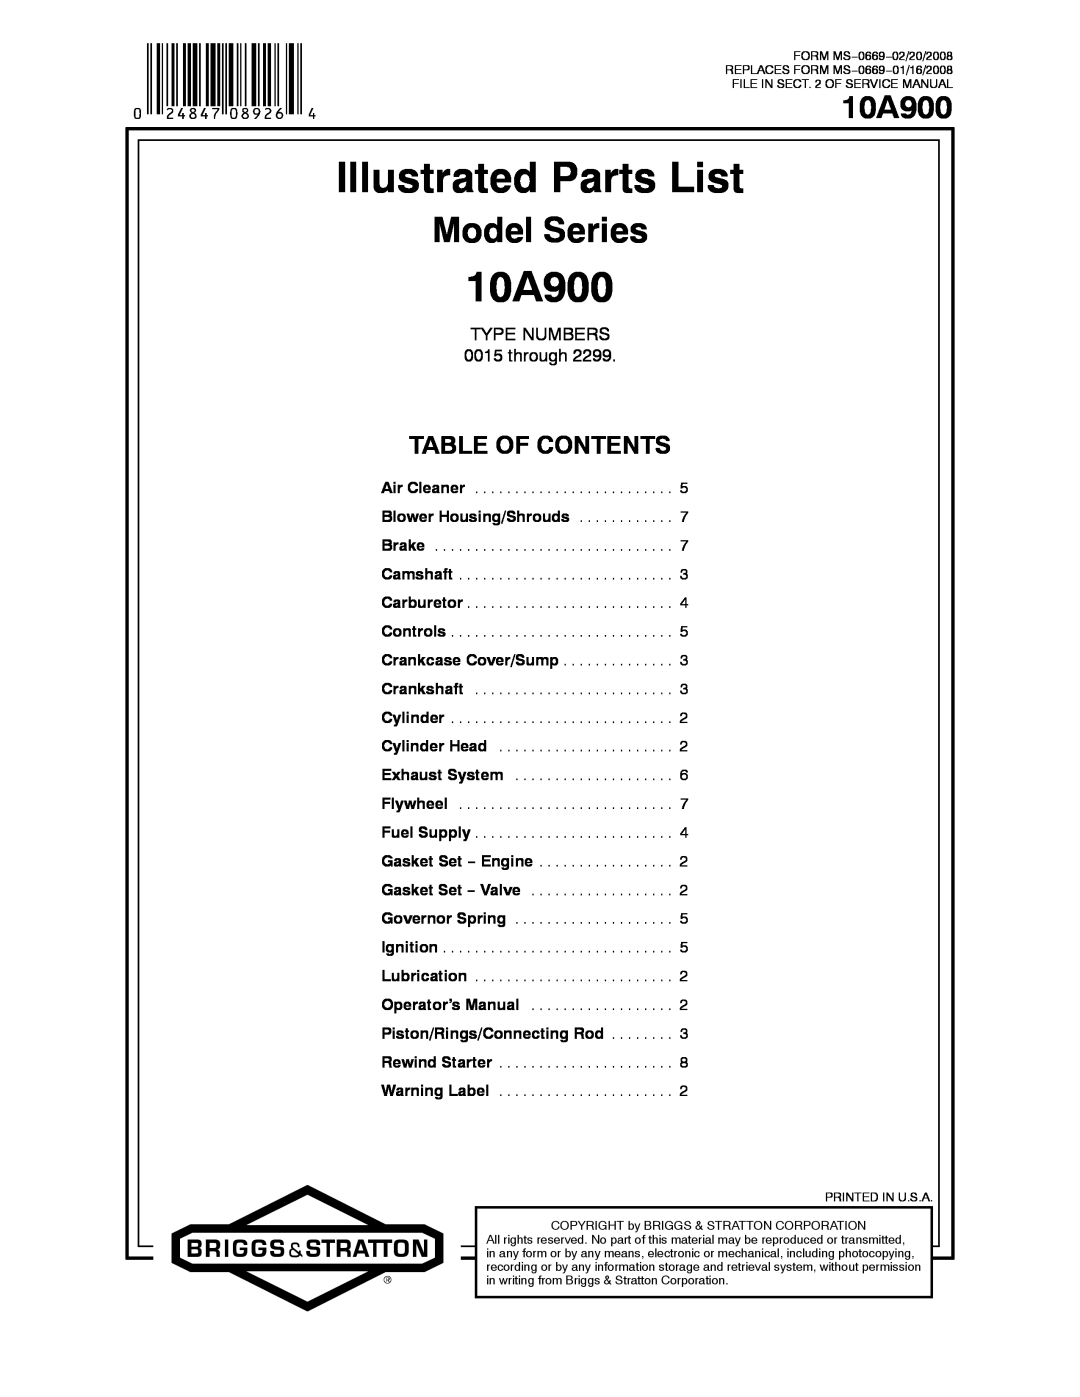 Snapper 10A900 service manual Illustrated Parts List, Model Series, Table Of Contents, TYPE NUMBERS 0015 through 